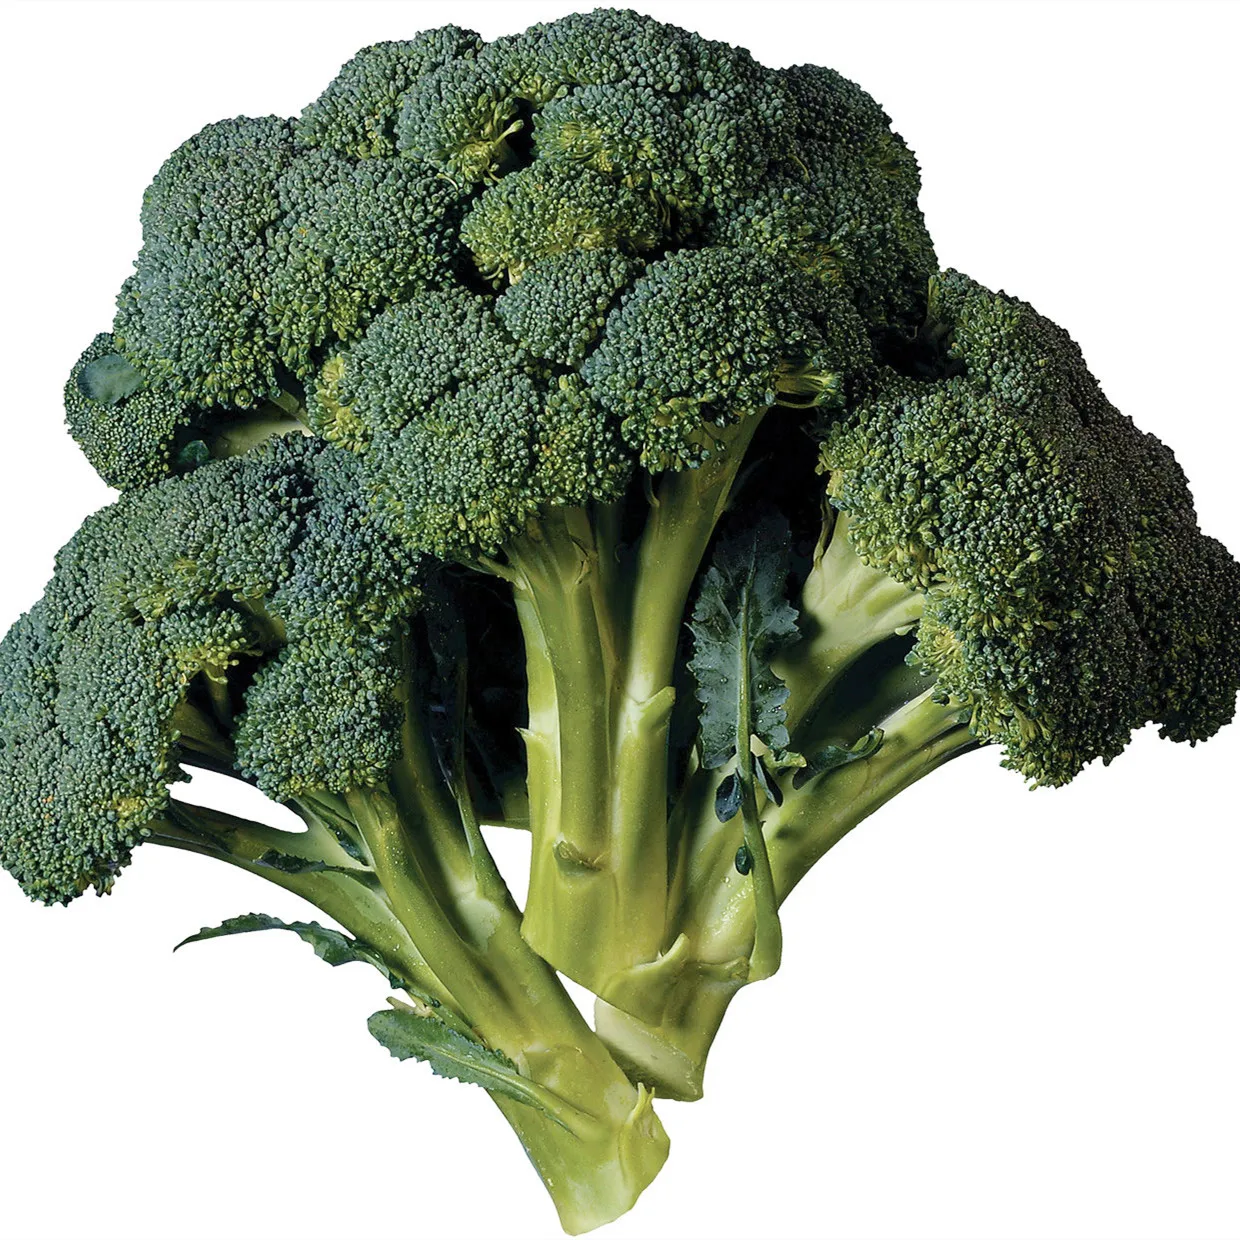 Organic and Green IQF Frozen Broccoli Florets of Various Sizes and Shapes for export